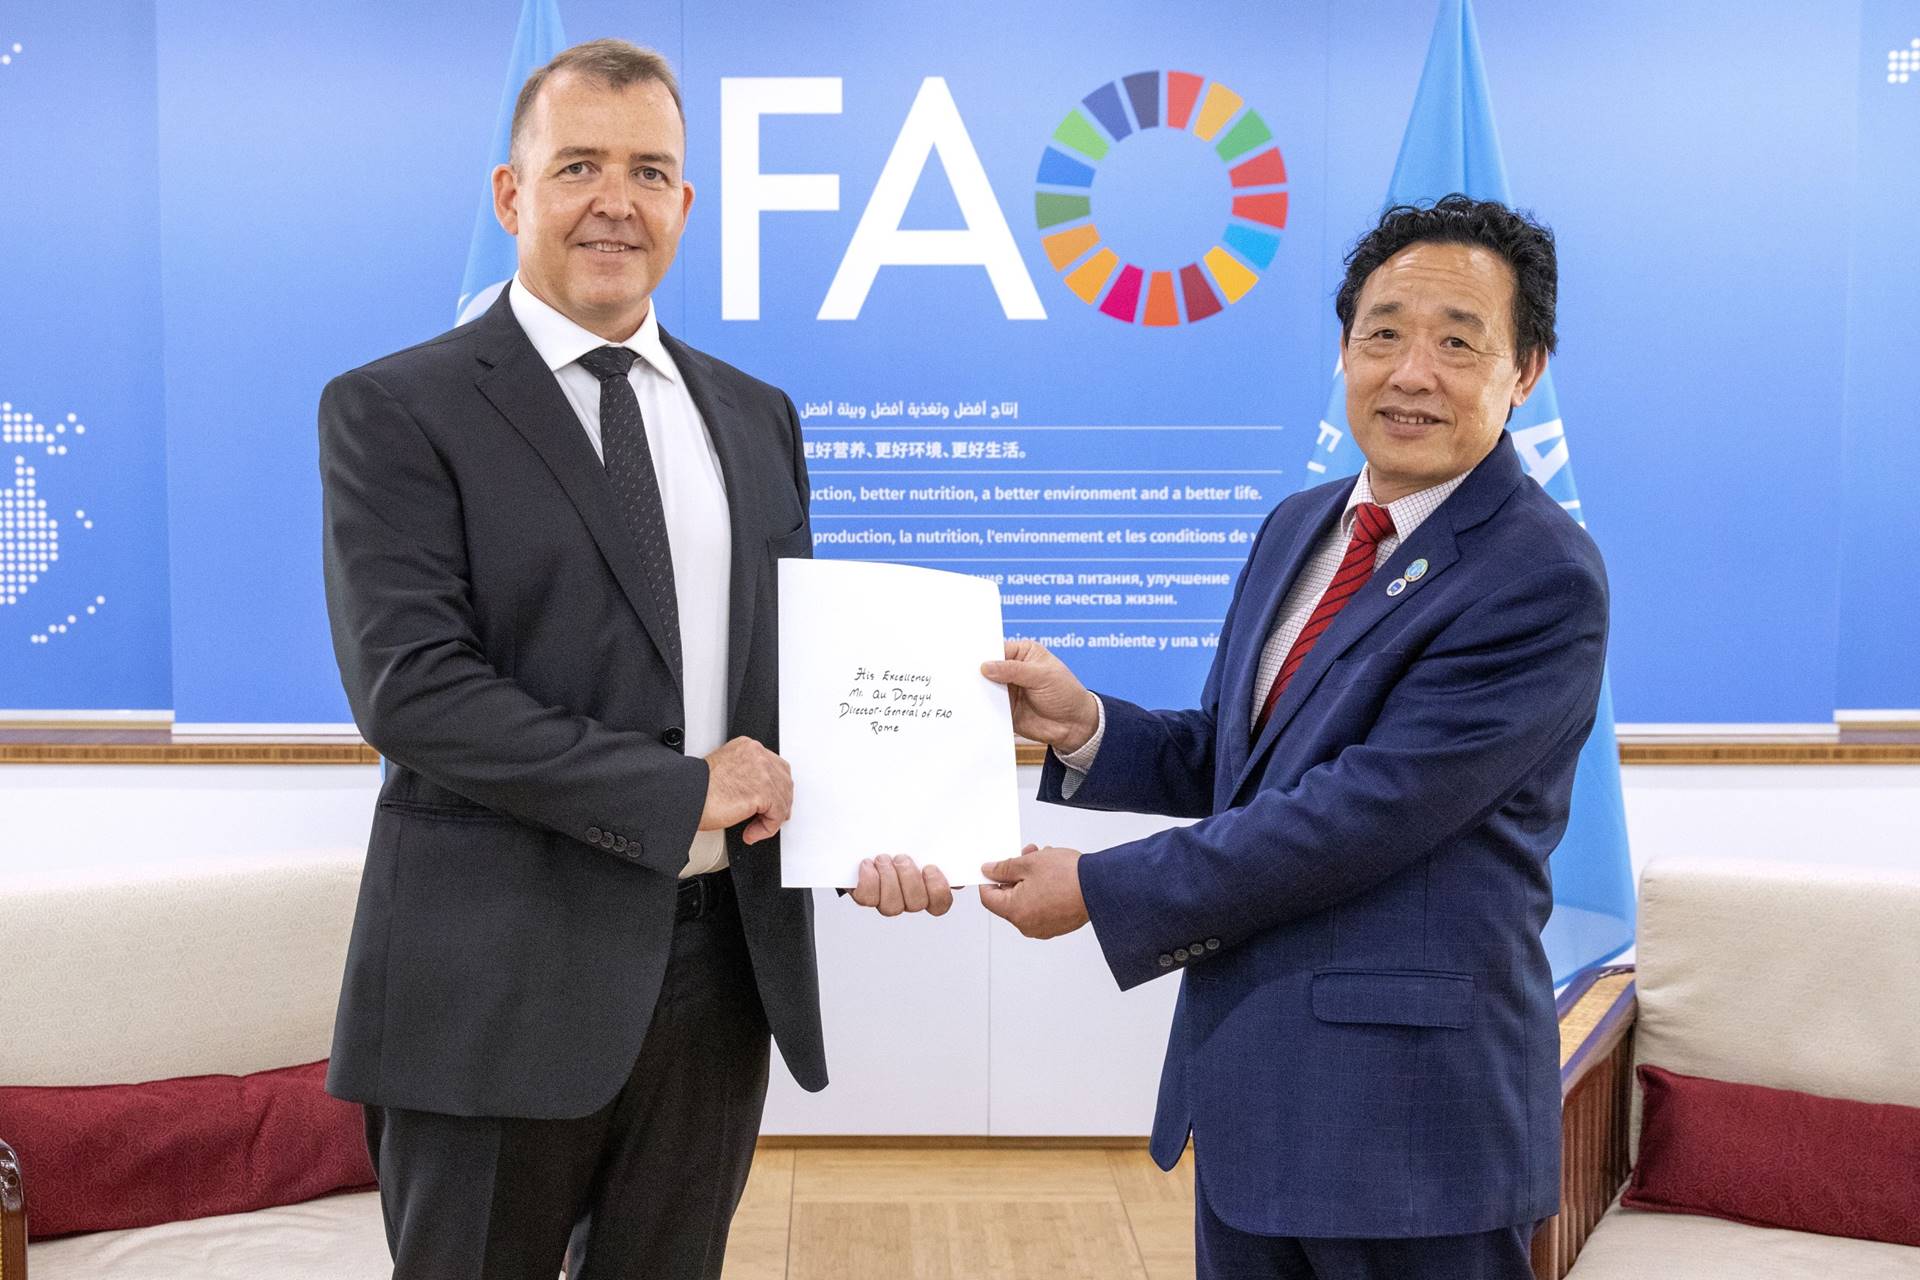 Matthías G. Pálsson, Permanent Representative of Iceland in Rome and Qu Dongyu, Director-General of FAO